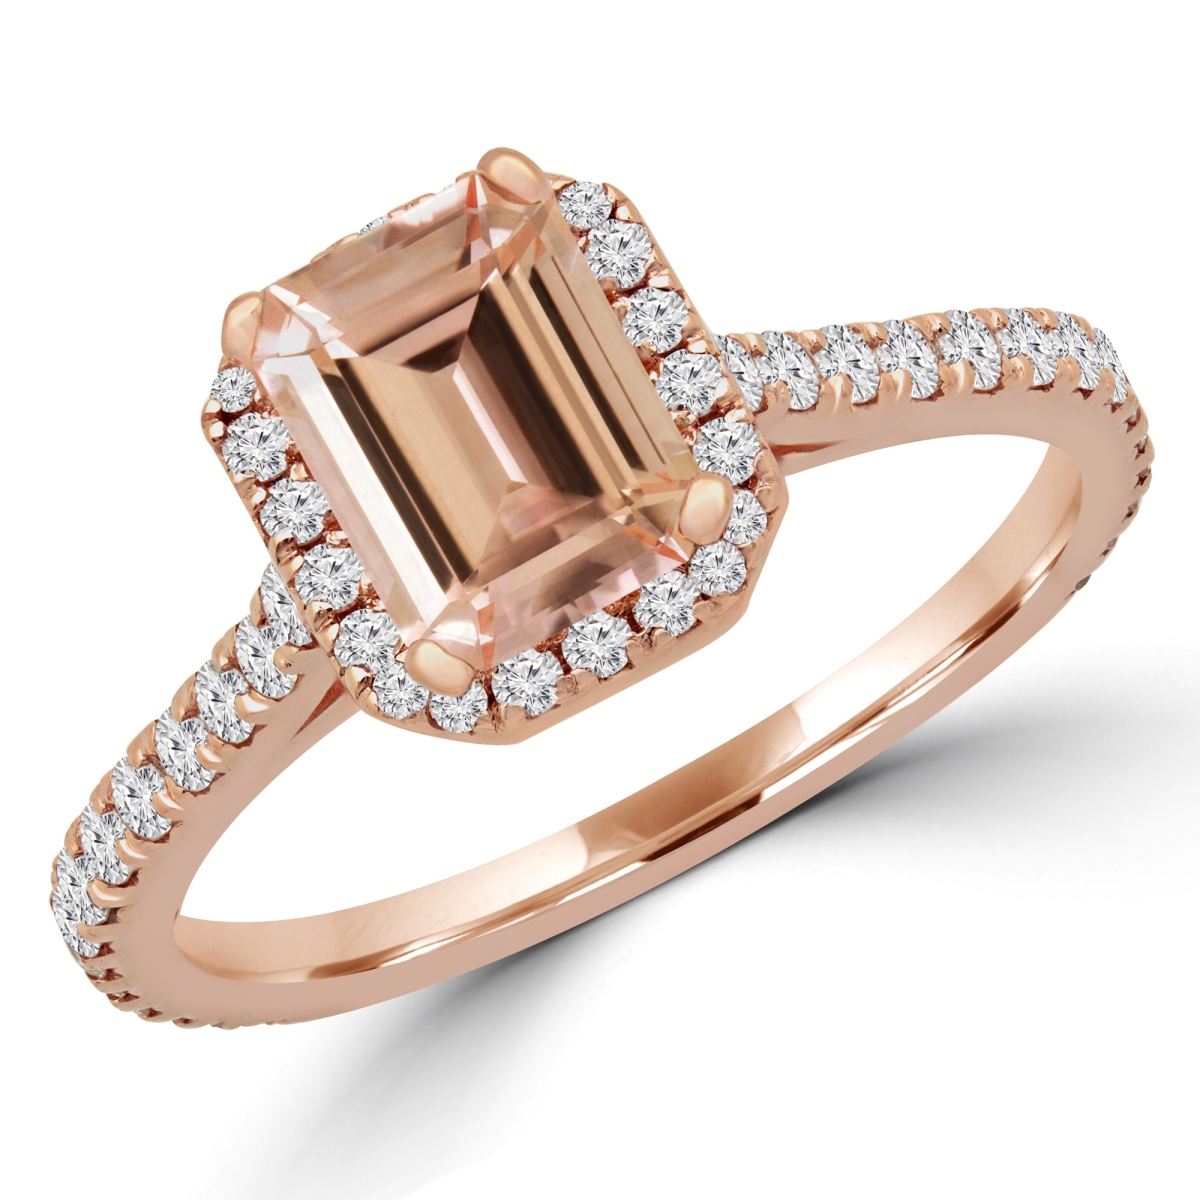 Picture of Majesty Diamonds MD180580-9 1.25 CTW Emerald Pink Morganite Halo Engagement Ring in 14K Rose Gold - Size 9